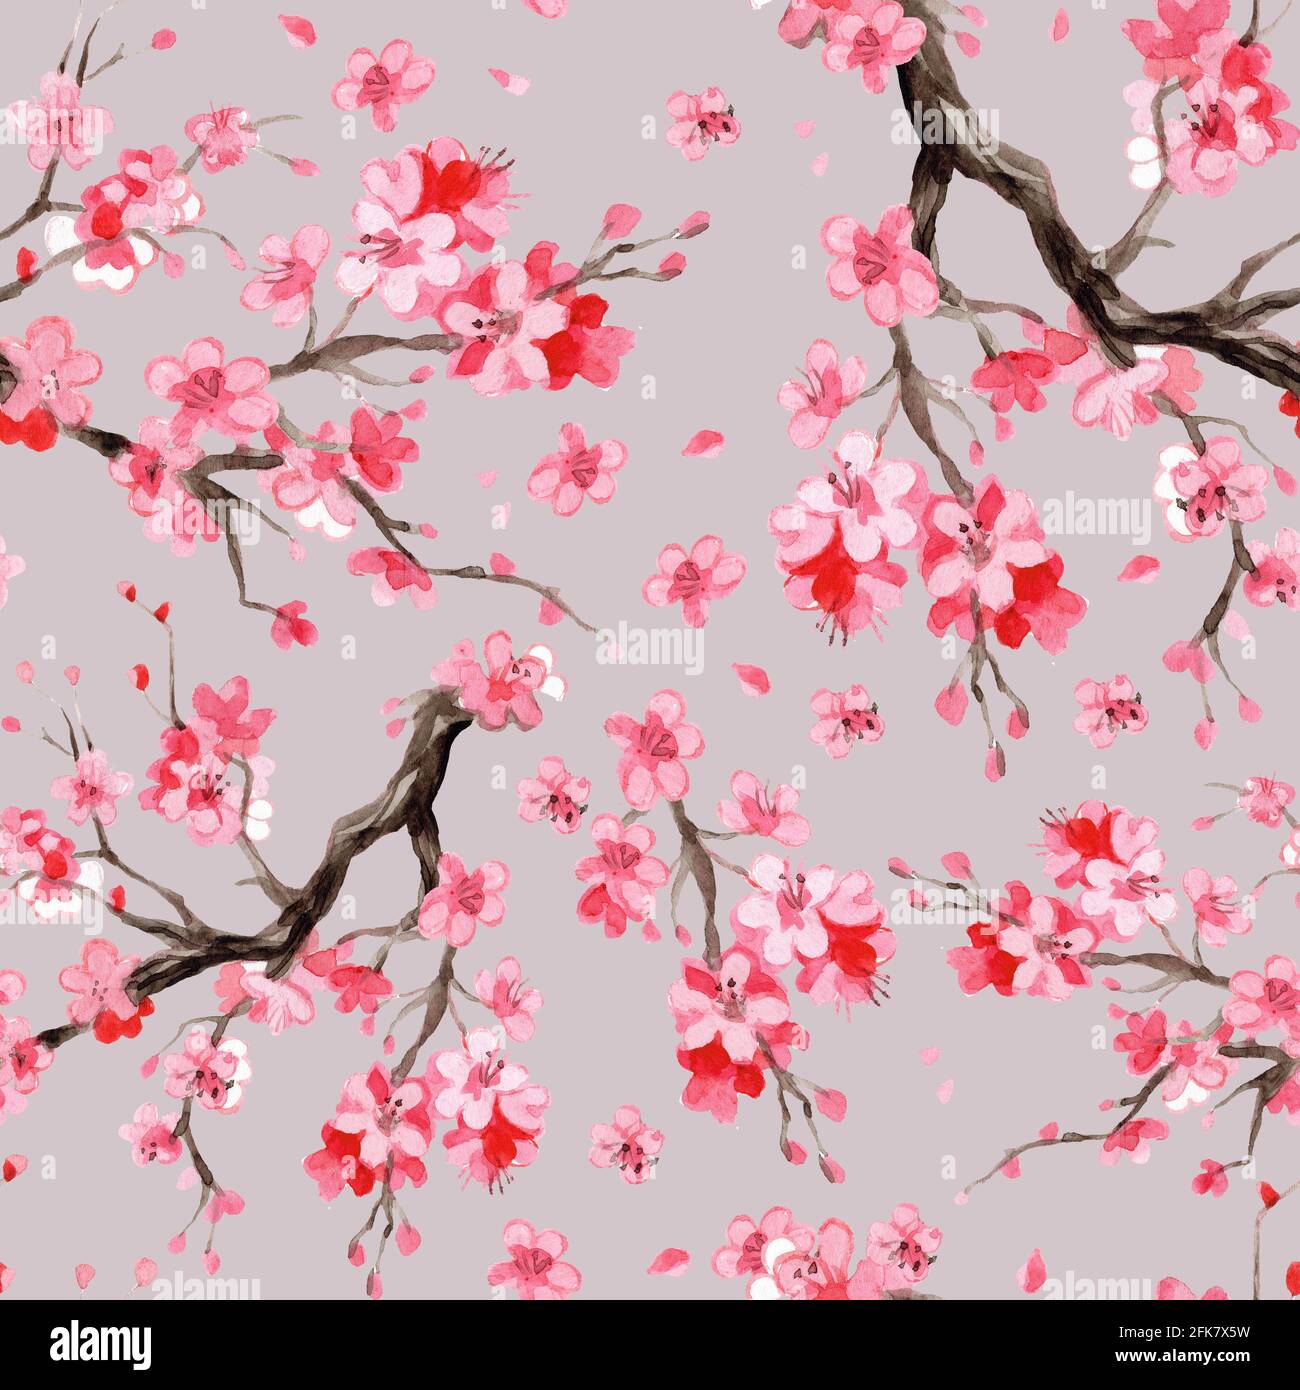 Seamless pattern with watercolor sakura. Hand drawn illustration cherry blossom branch with flowers on gray background. For design sushi restaurant me Stock Photo